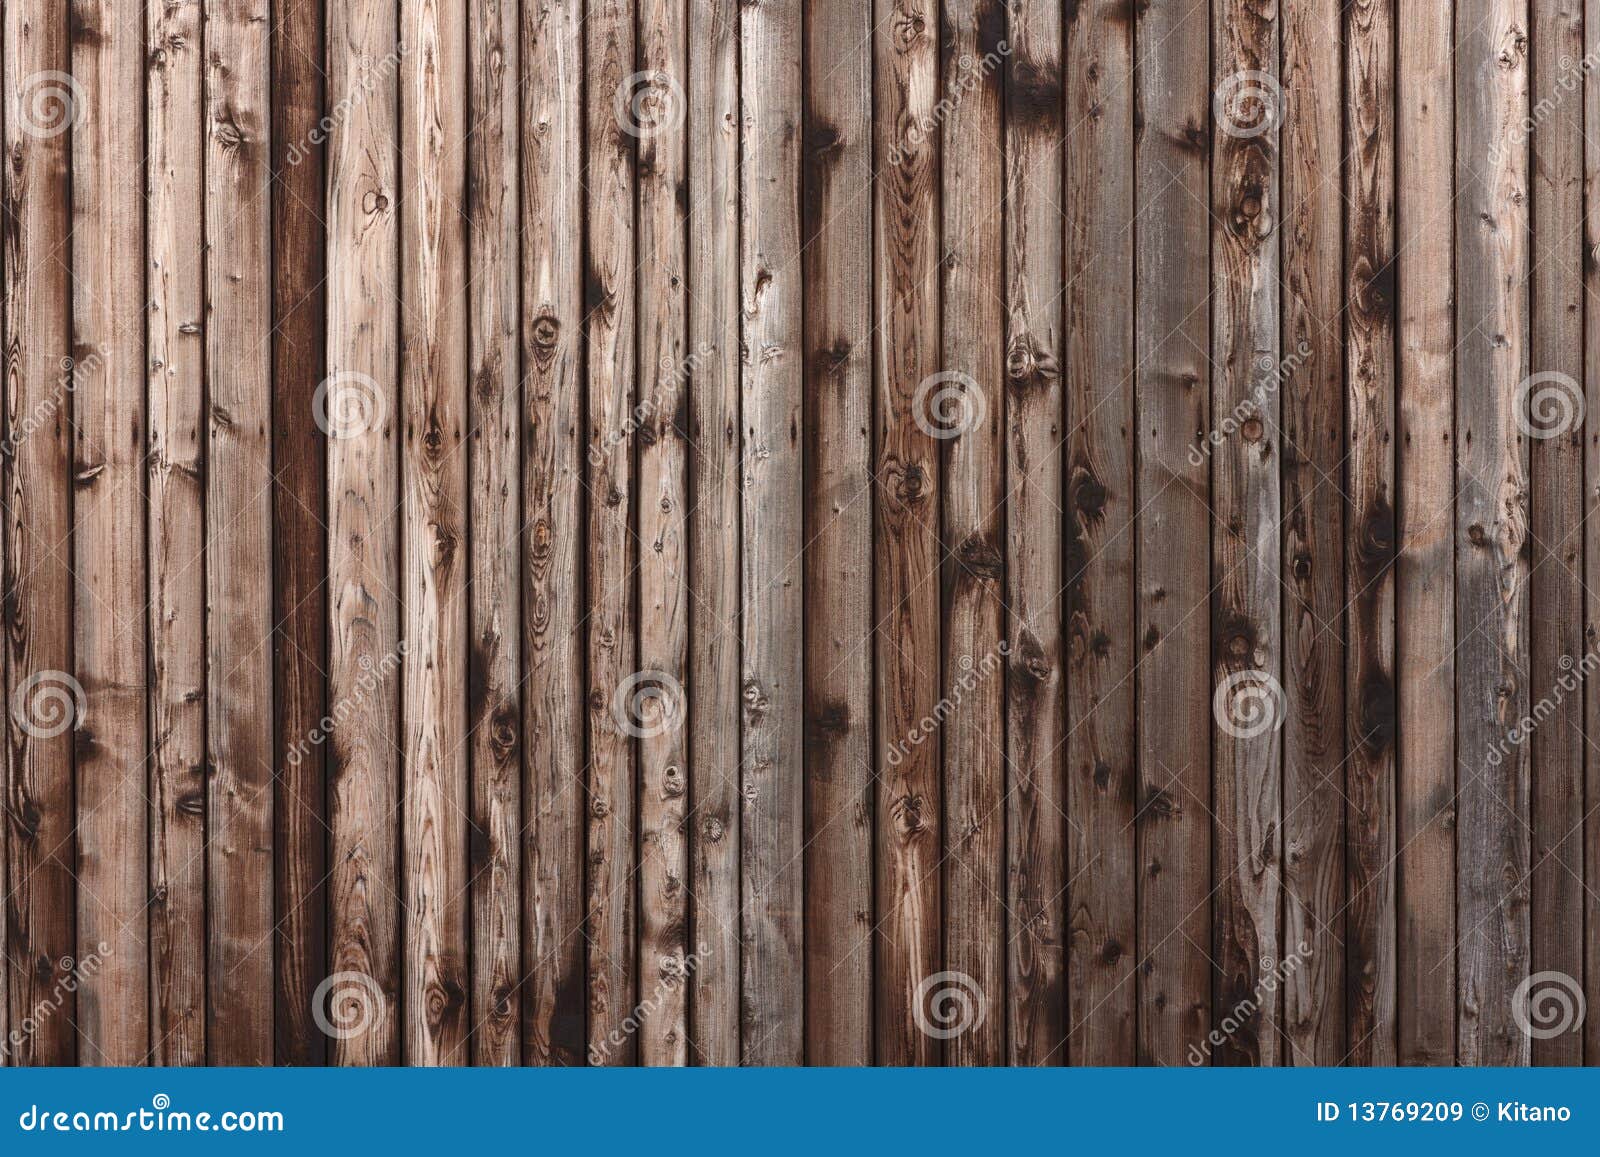 Old Wooden Wall Stock Photo, Picture and Royalty Free Image. Image